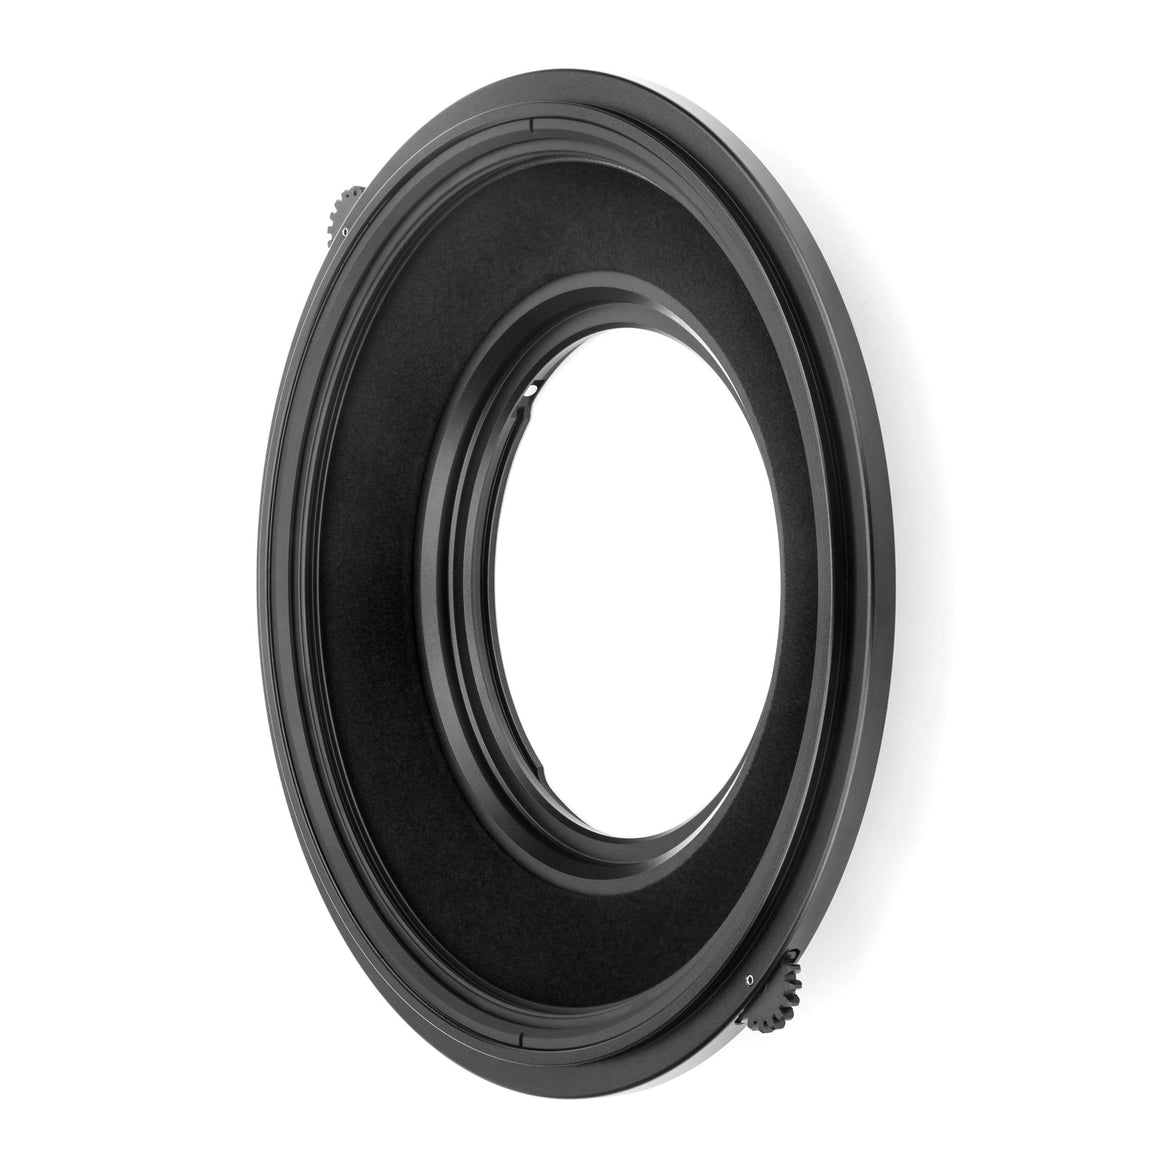 nisi-s6-150mm-filter-holder-adapter-ring-for-nikon-z-14-24mm-f-2-8s